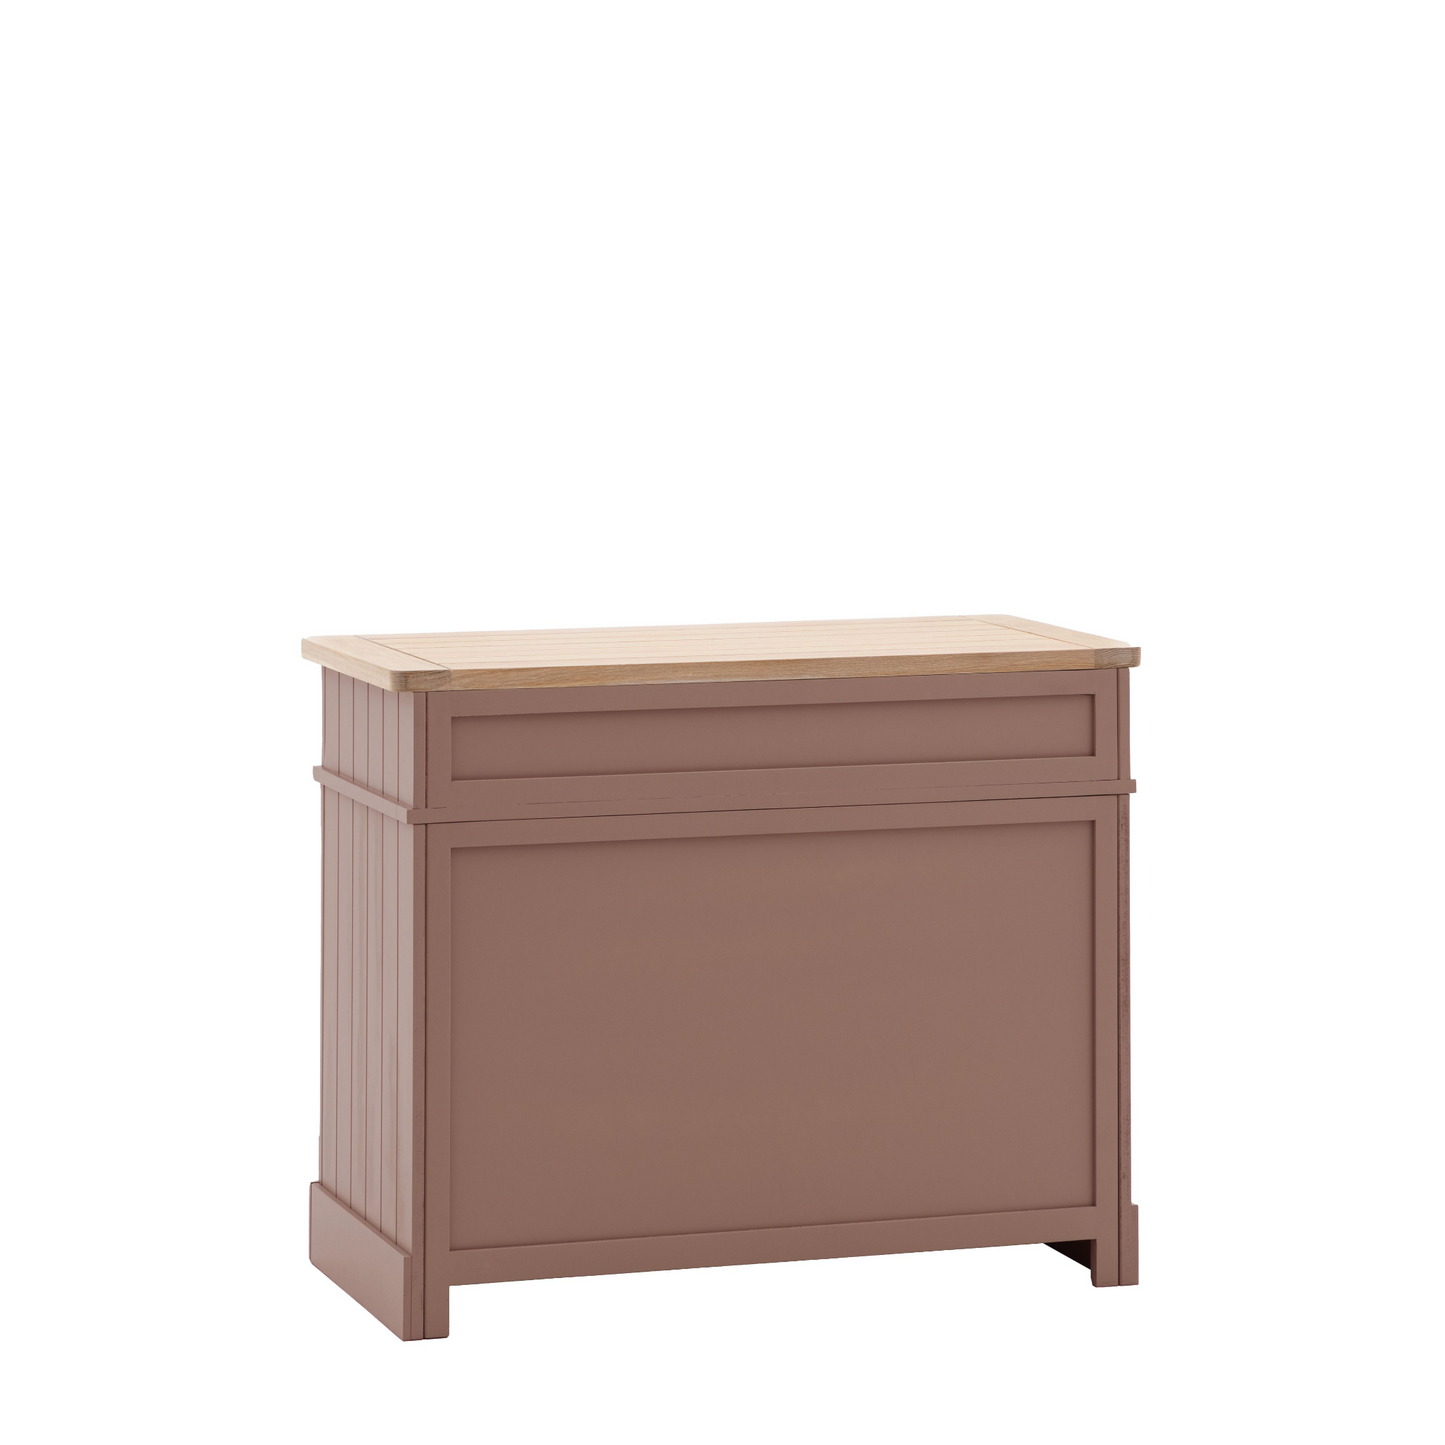 A Buckland 2 Door 1 Drawer Sideboard in Clay with a wooden top for interior decor and home furniture.